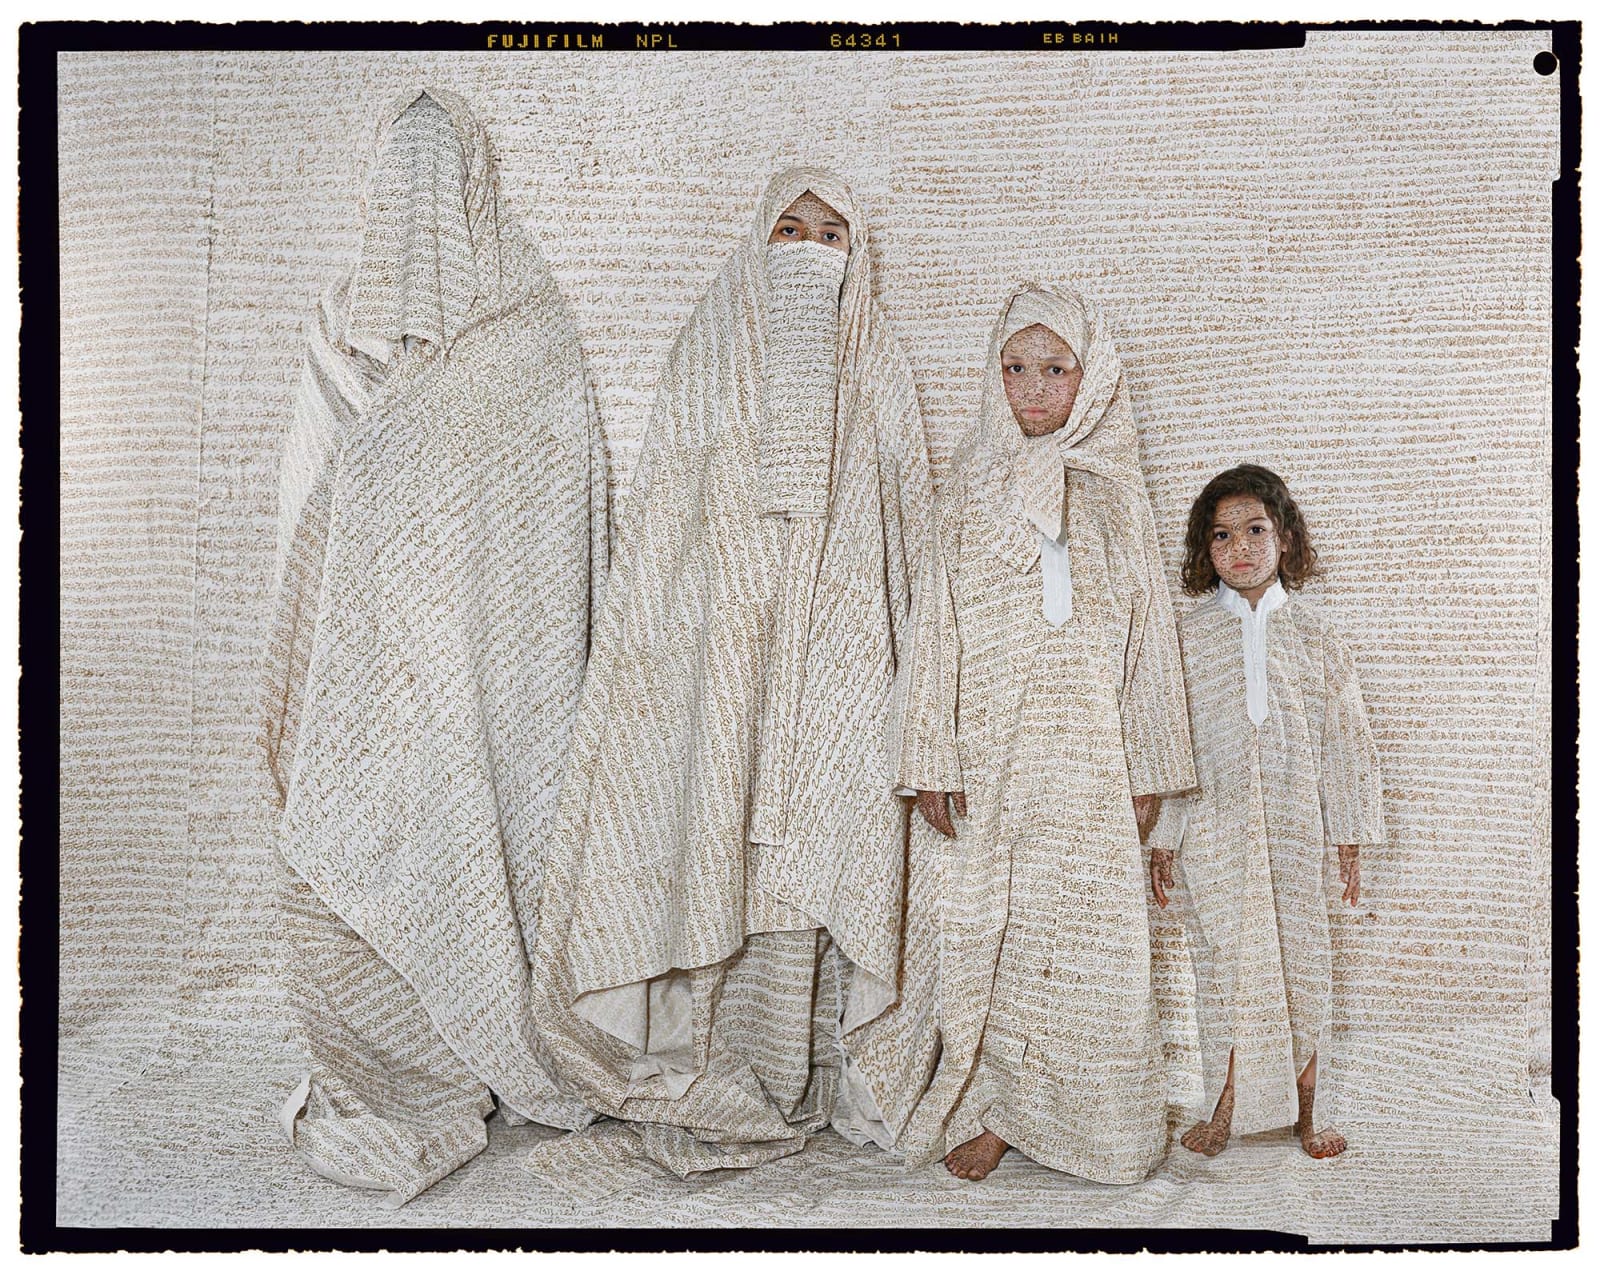 Lalla Essaydi, Converging Territories #30 four generations of women wearing traditional clothing in various stylings, fabric inscribed with Arabic calligraphy in henna